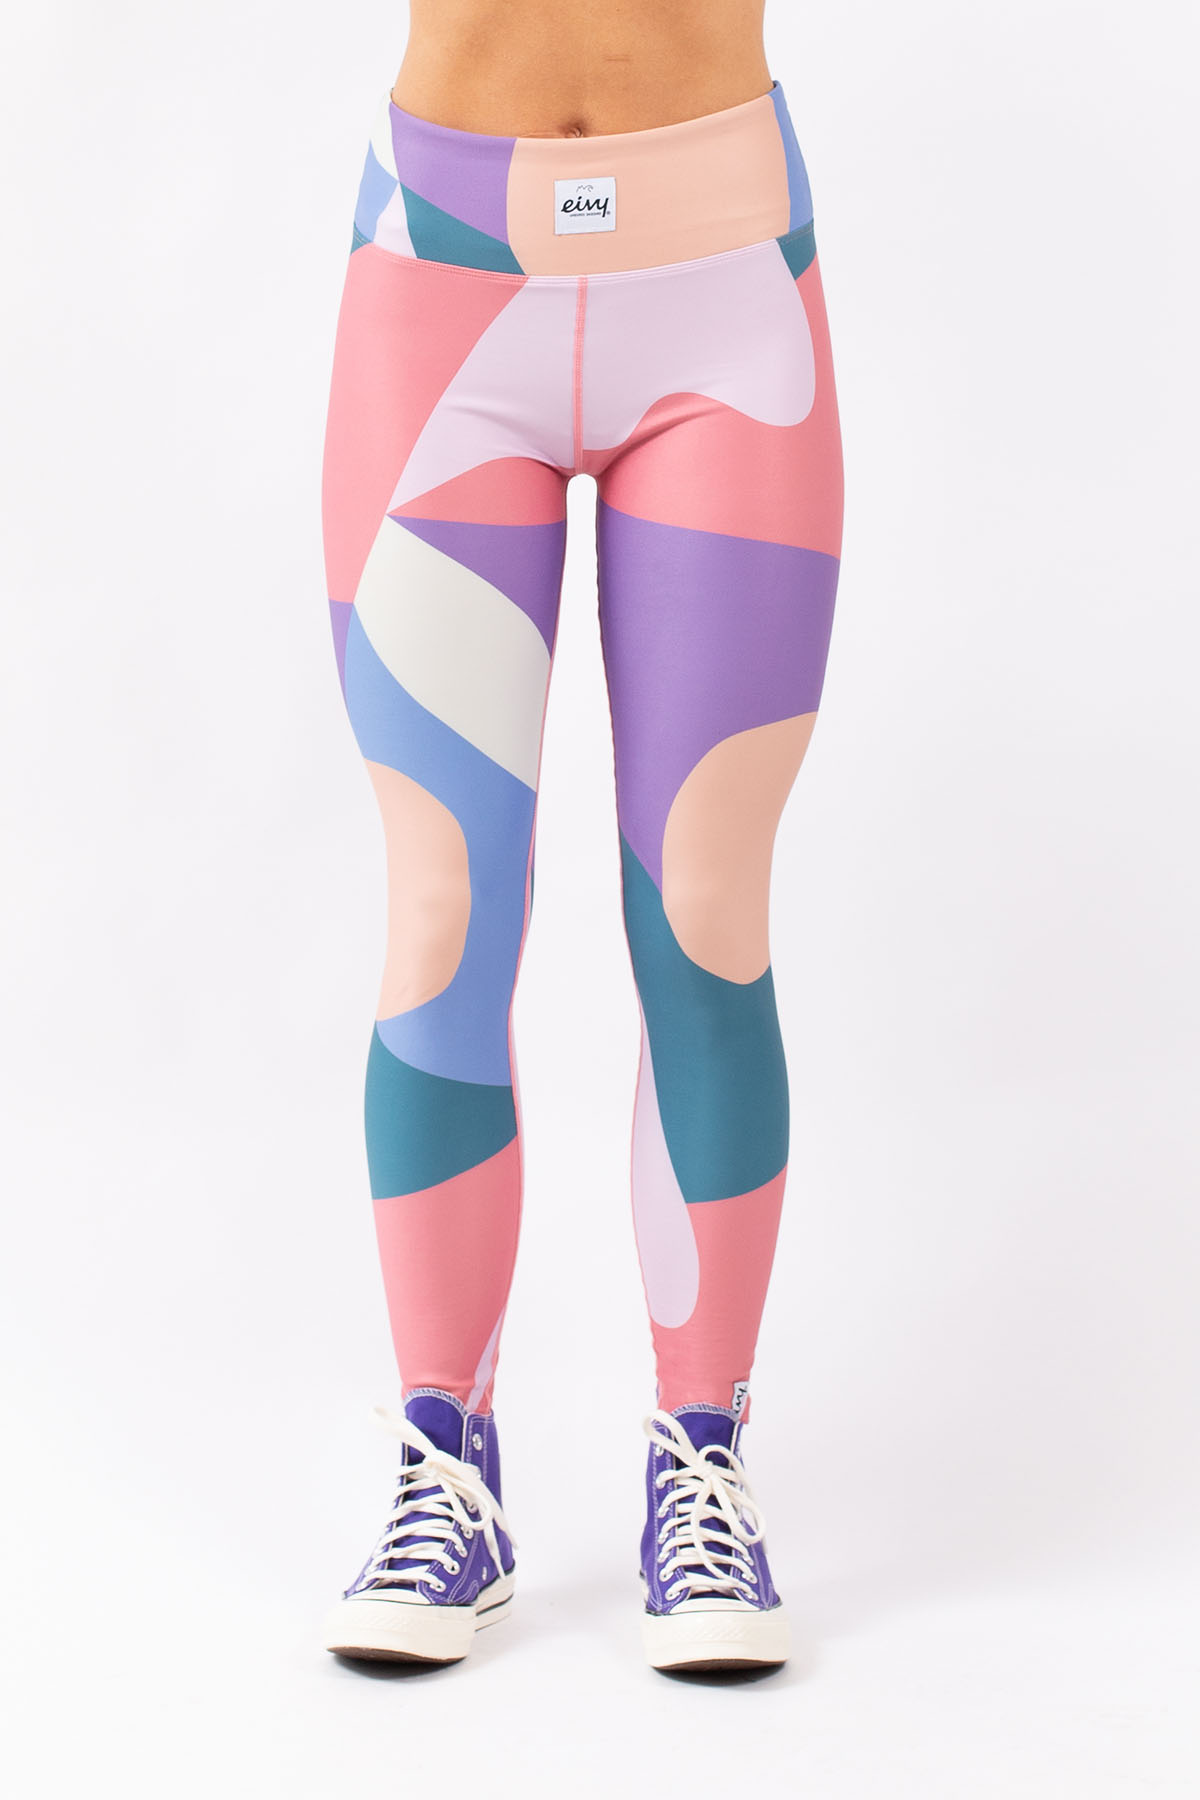 Icecold Tights - Abstract Shapes | S